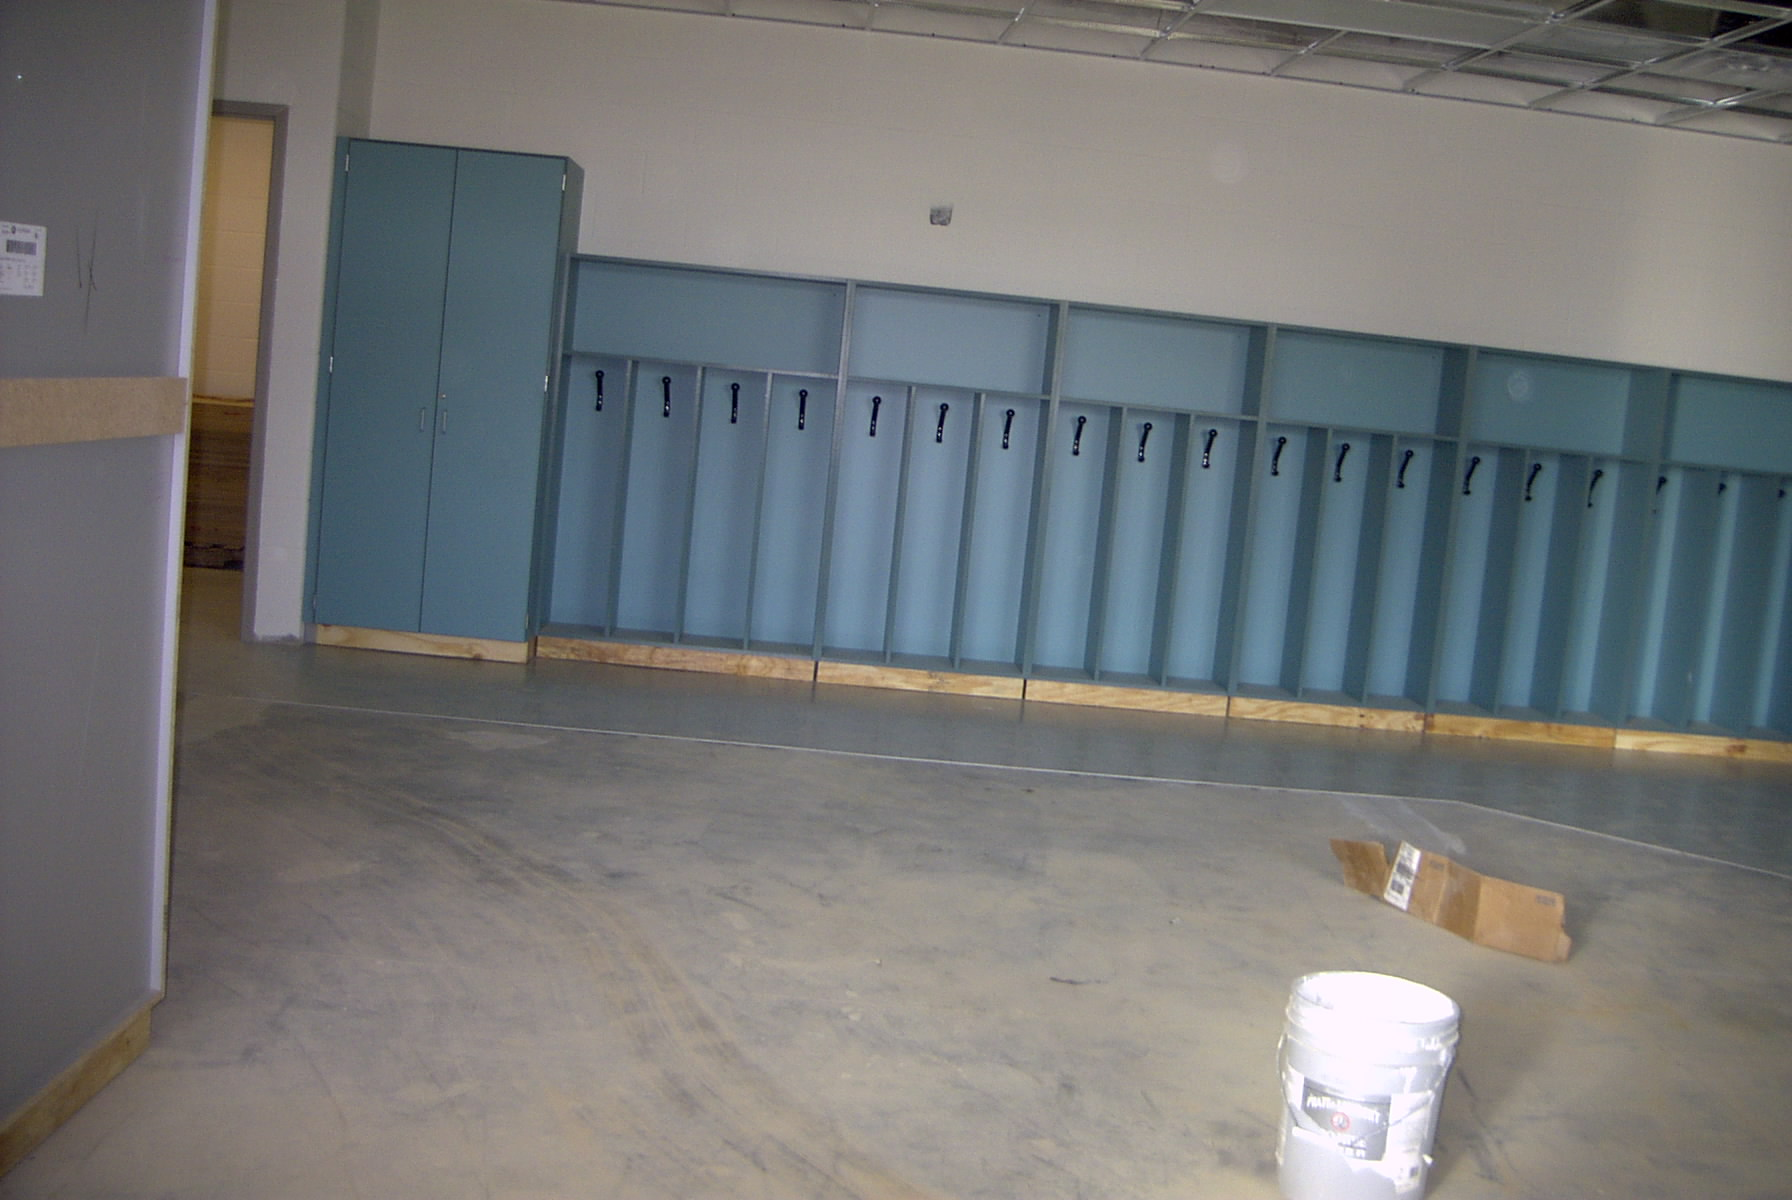 1st grade cubbies and casework